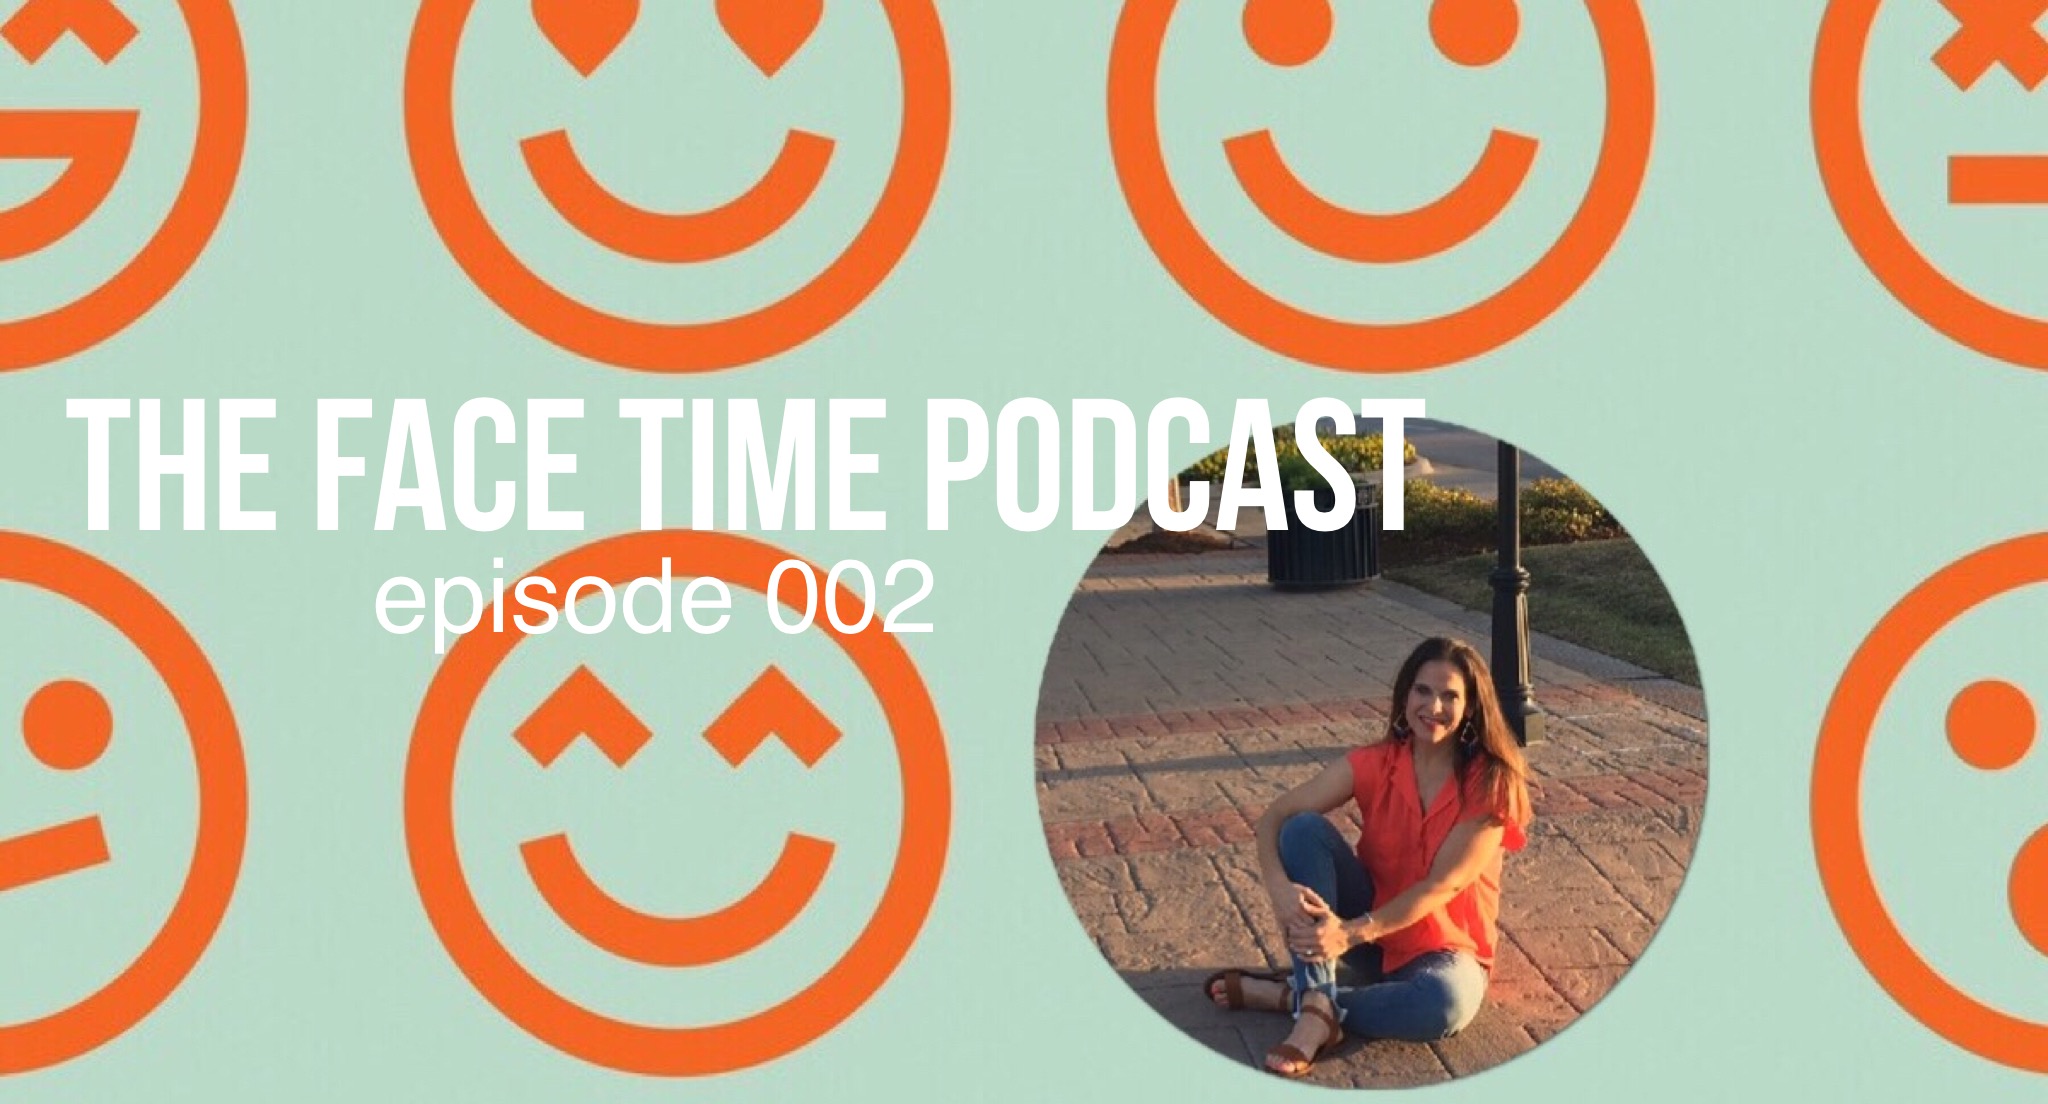 Face Time Podcast Episode 002: Striving for Perfection with Mary Carlisle Crehore